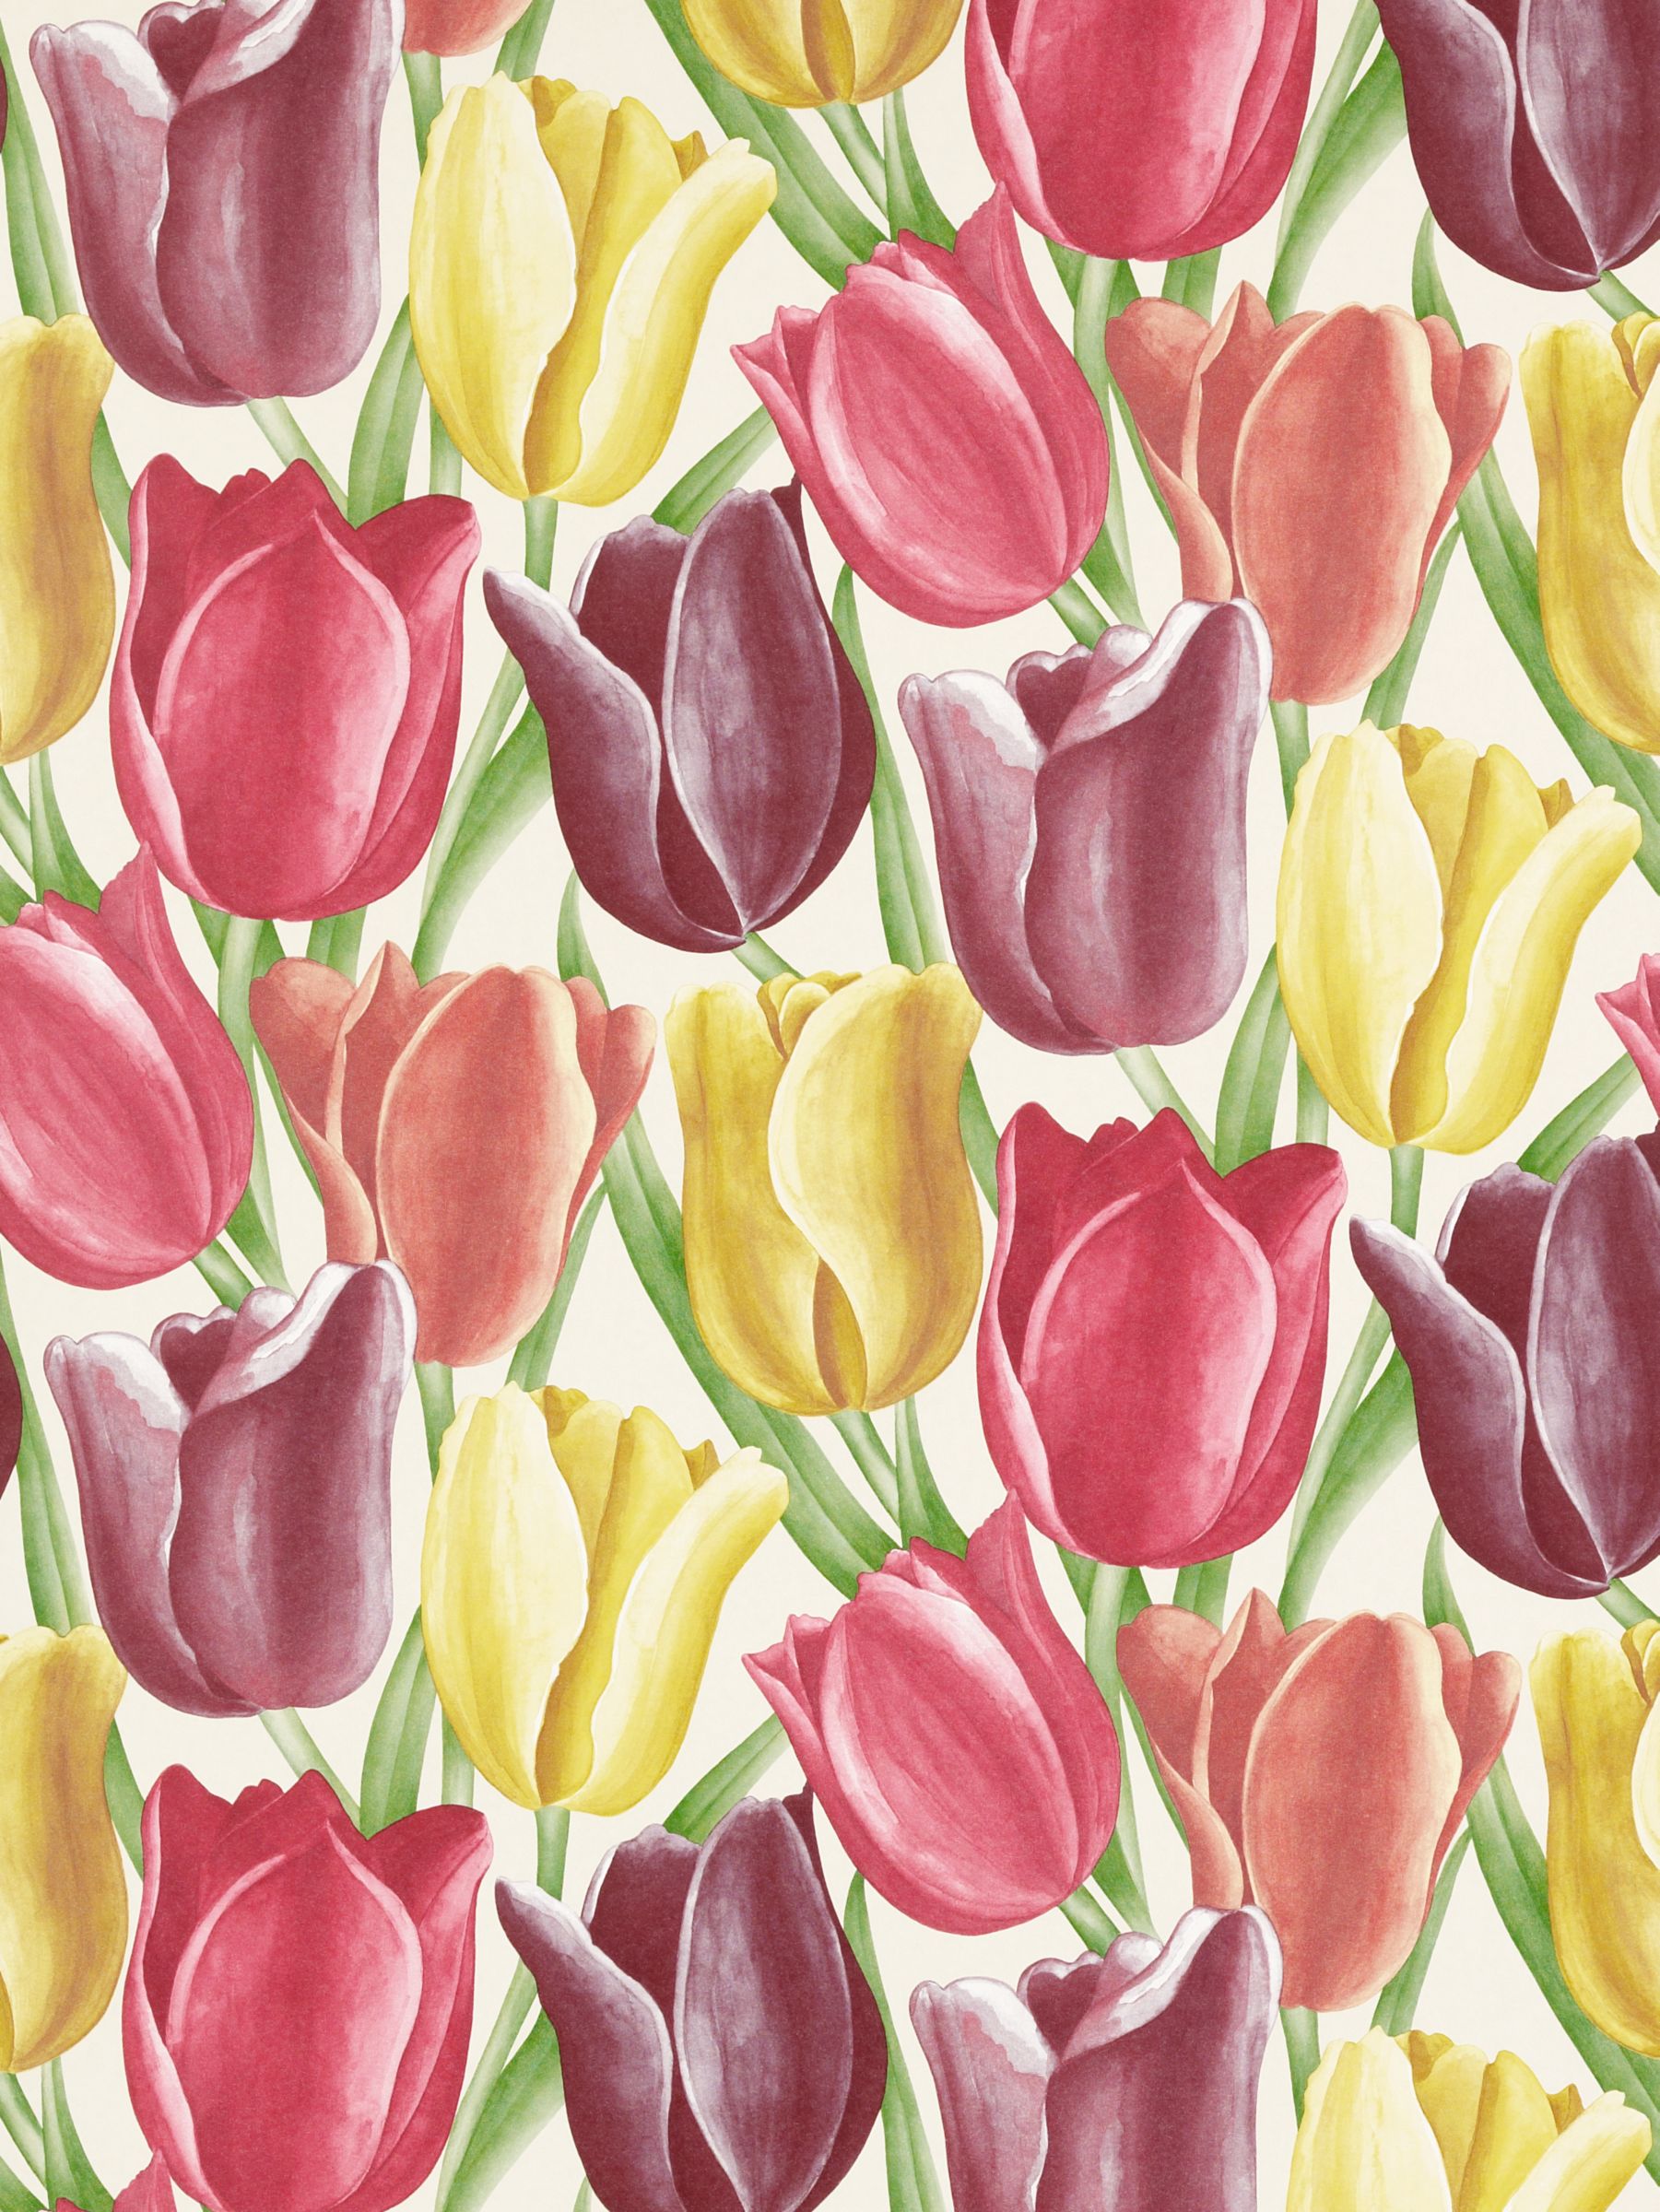 aubergine wallpaper. This wallpaper is printed by